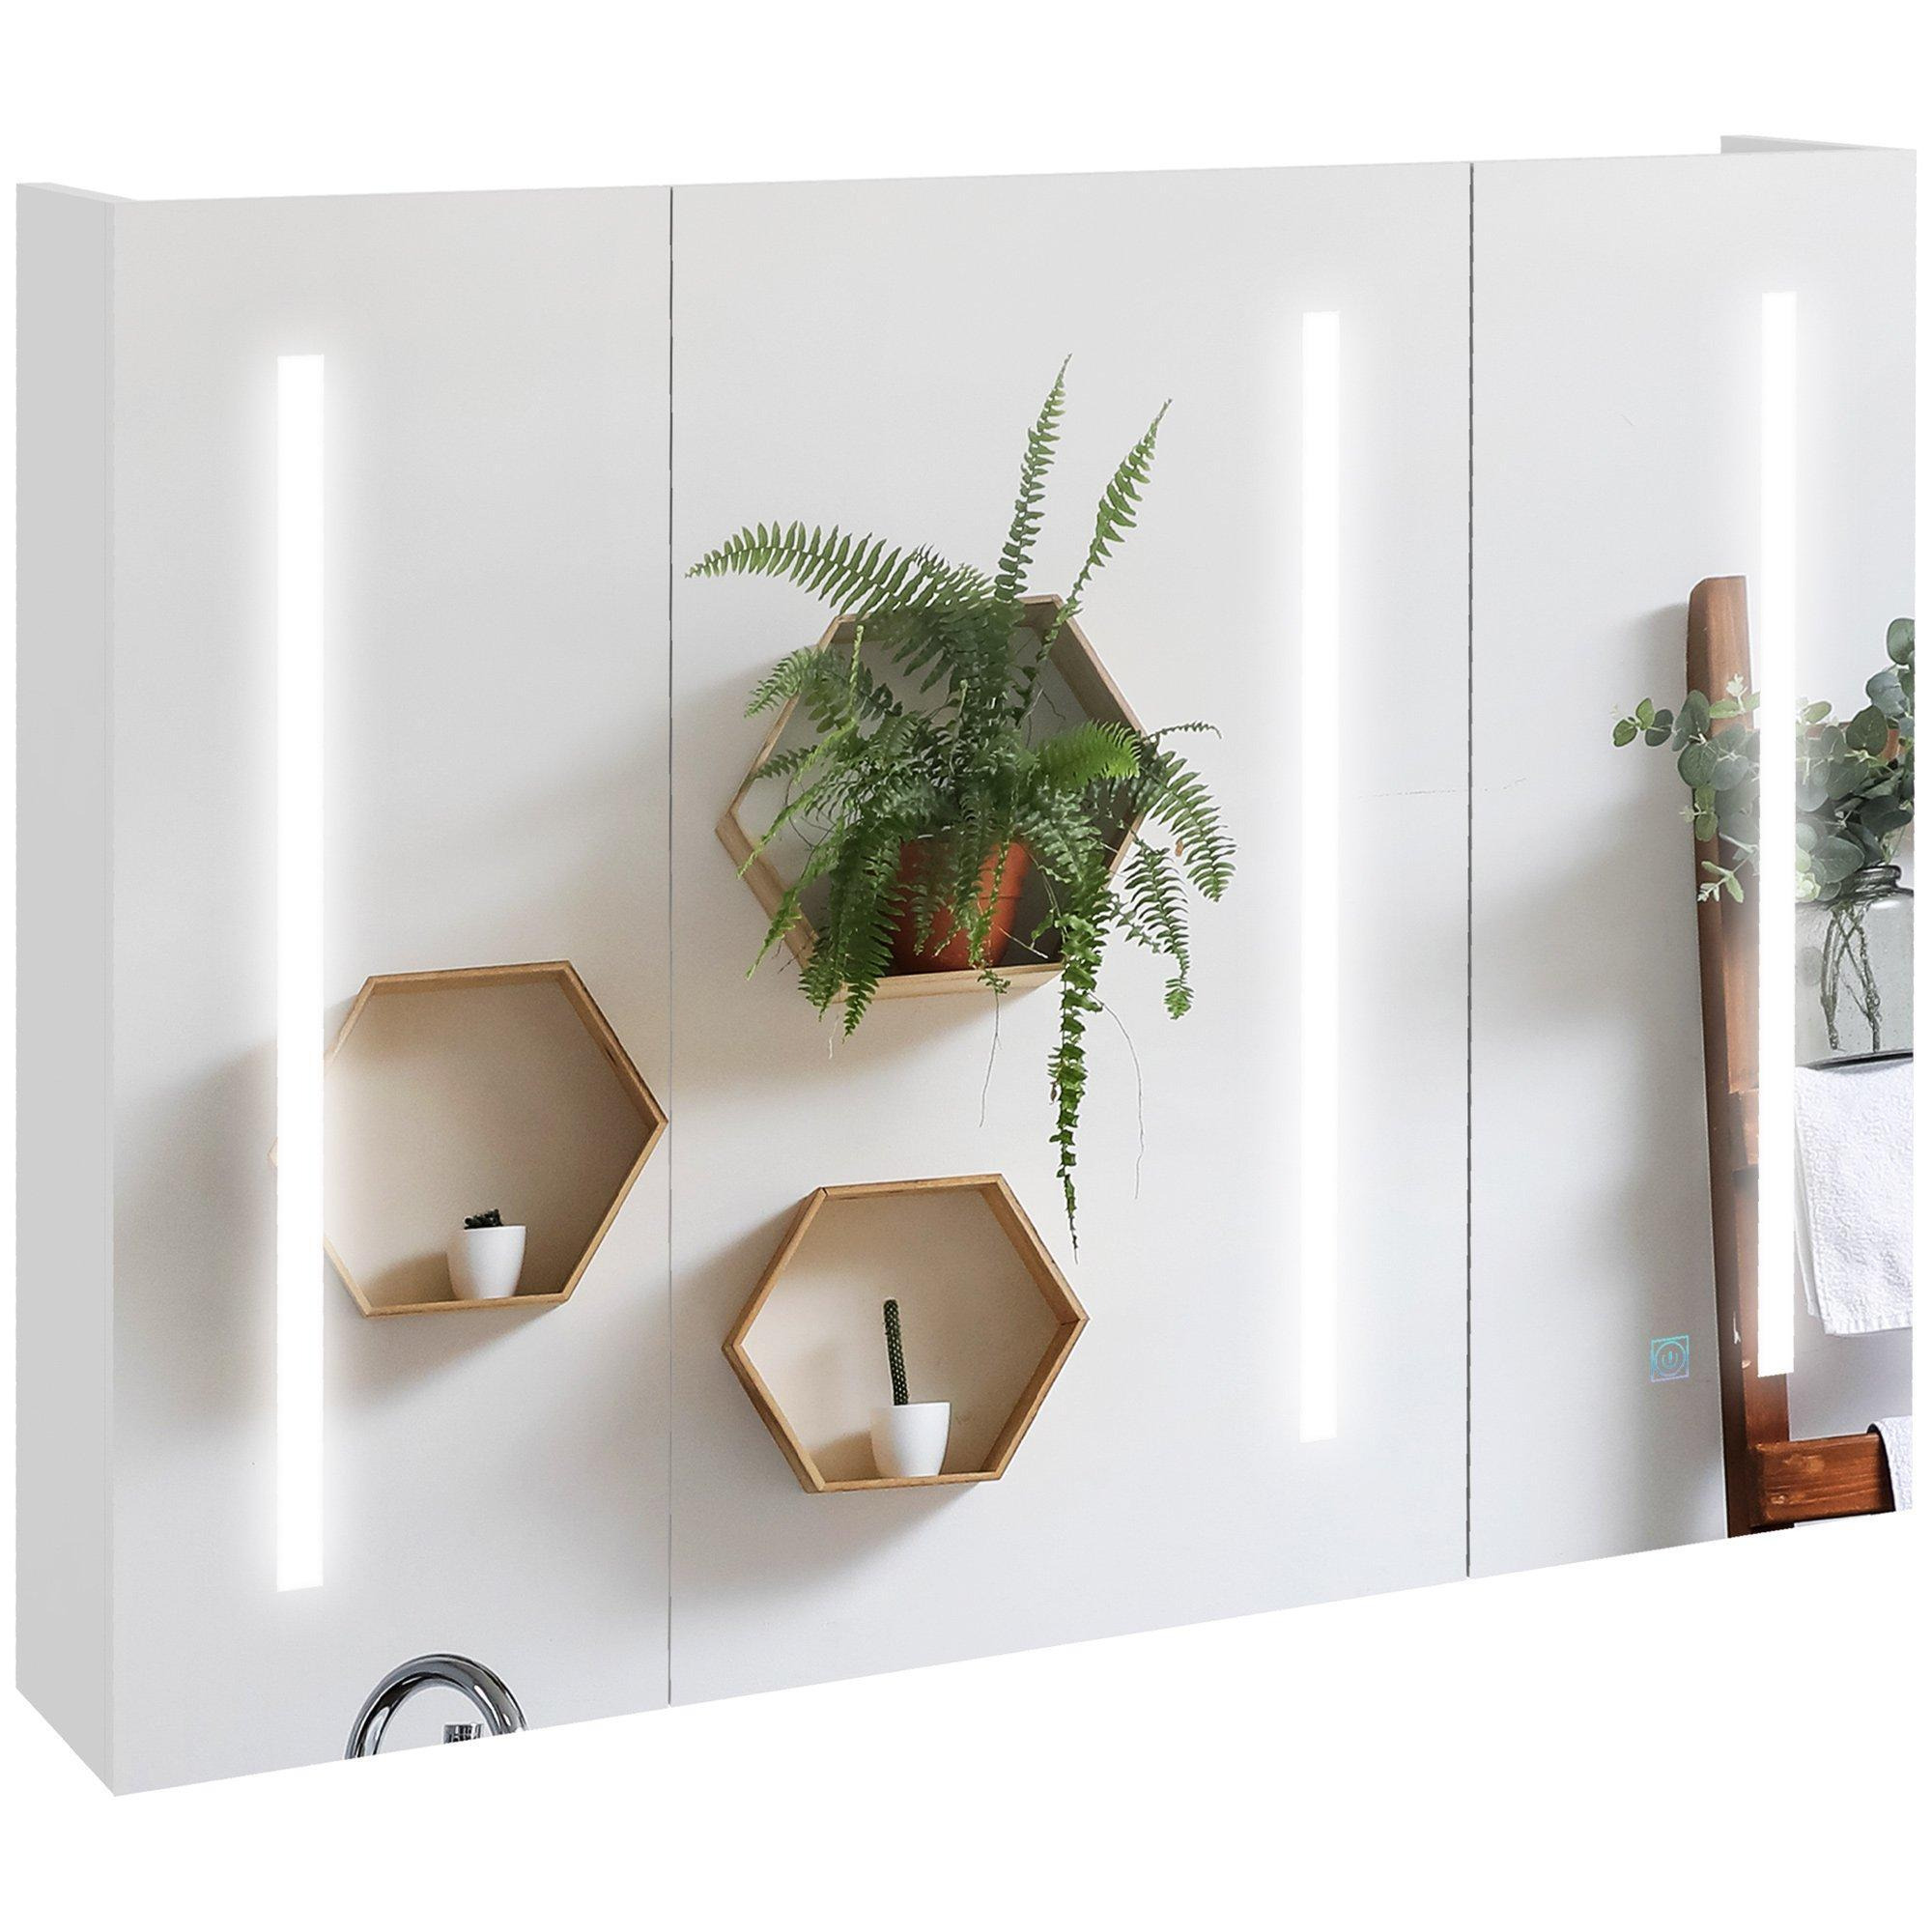 Bathroom Mirror Cabinet with LED Light and Adjustable Shelf White - image 1